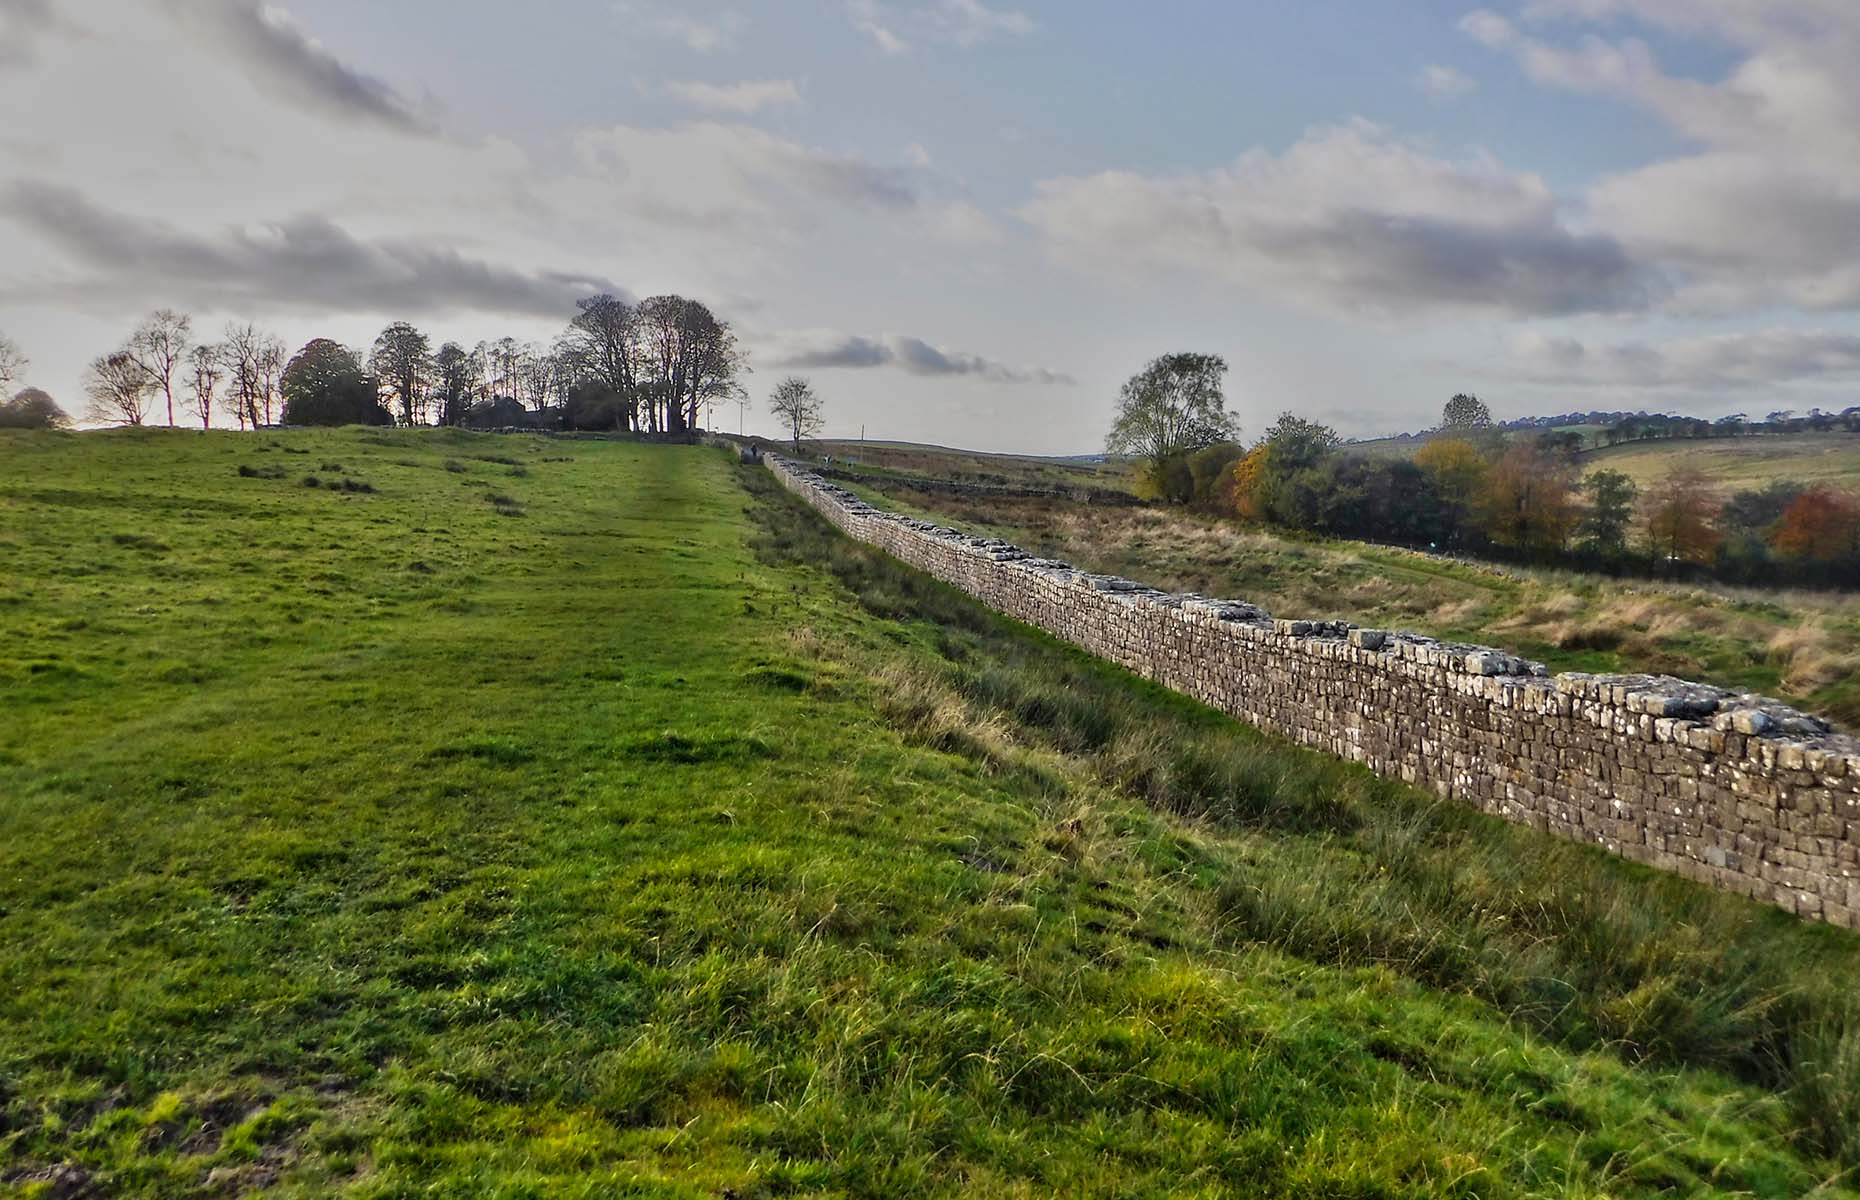 Harrows Scar Milecastle and Wall (Image: jcw1967/Flickr/CC BY-NC-ND 2.0)